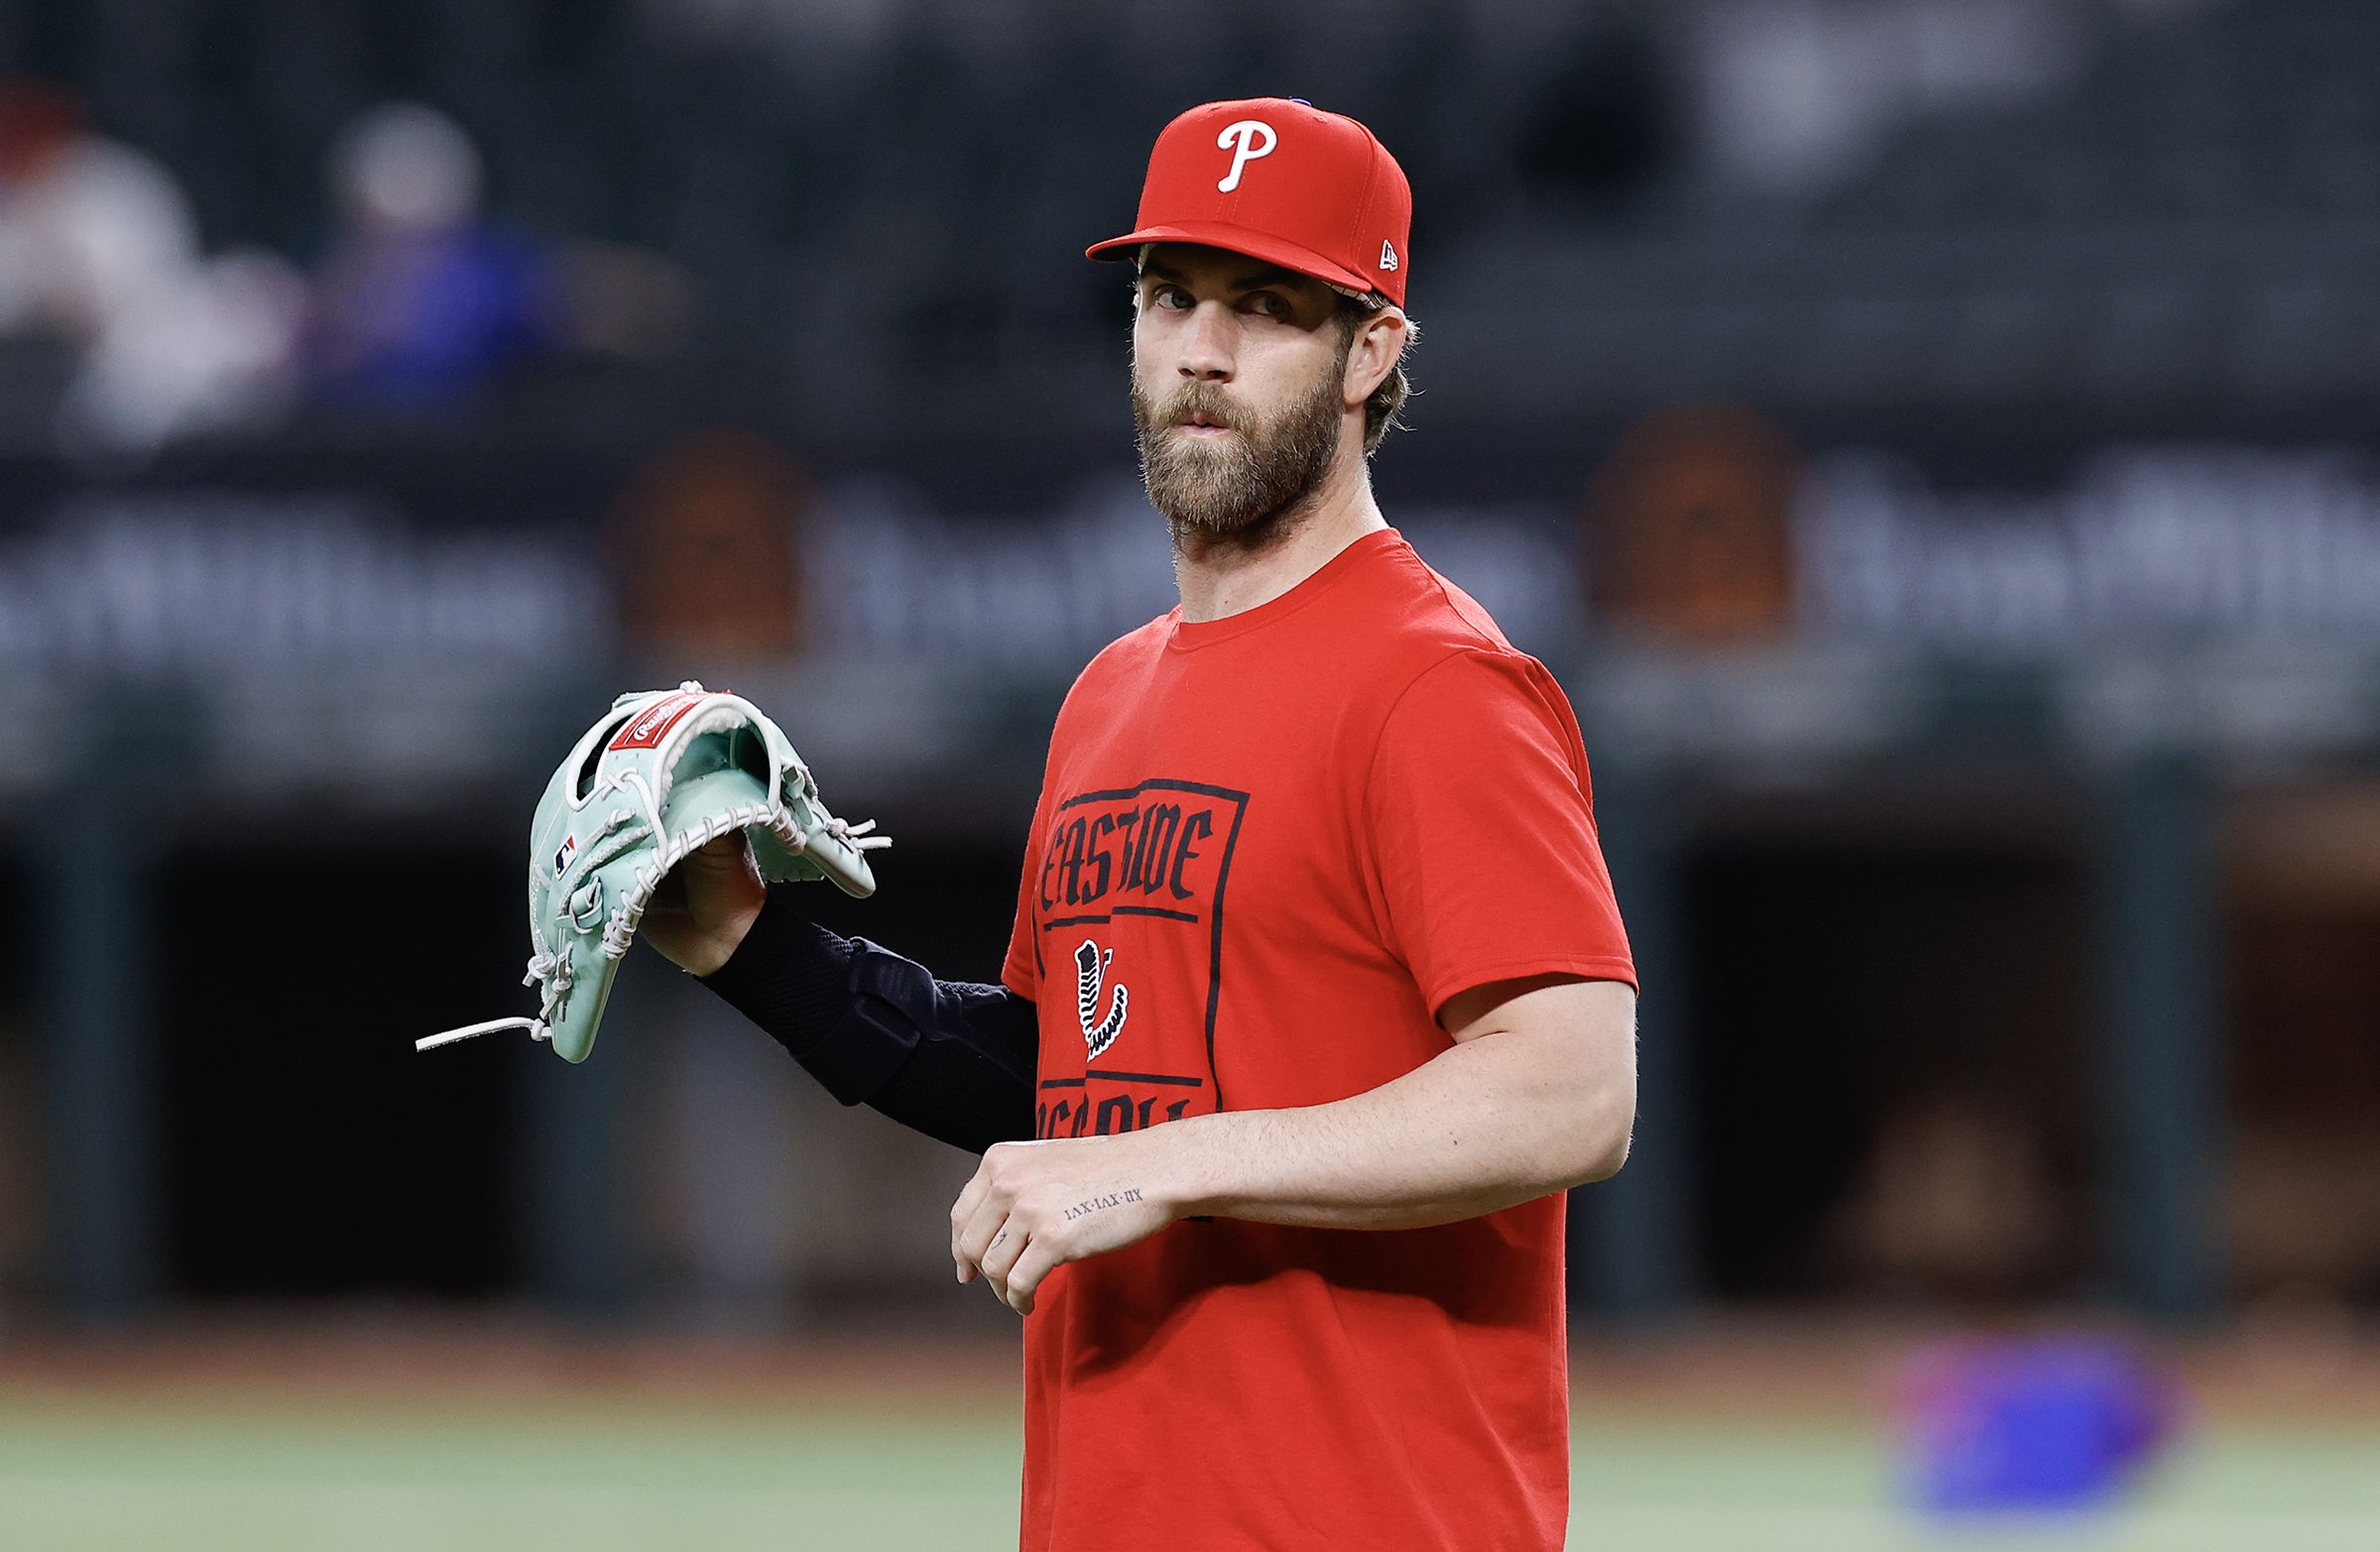 Phillies slugger Bryce Harper gets ESPN's attention with pitch clock comment